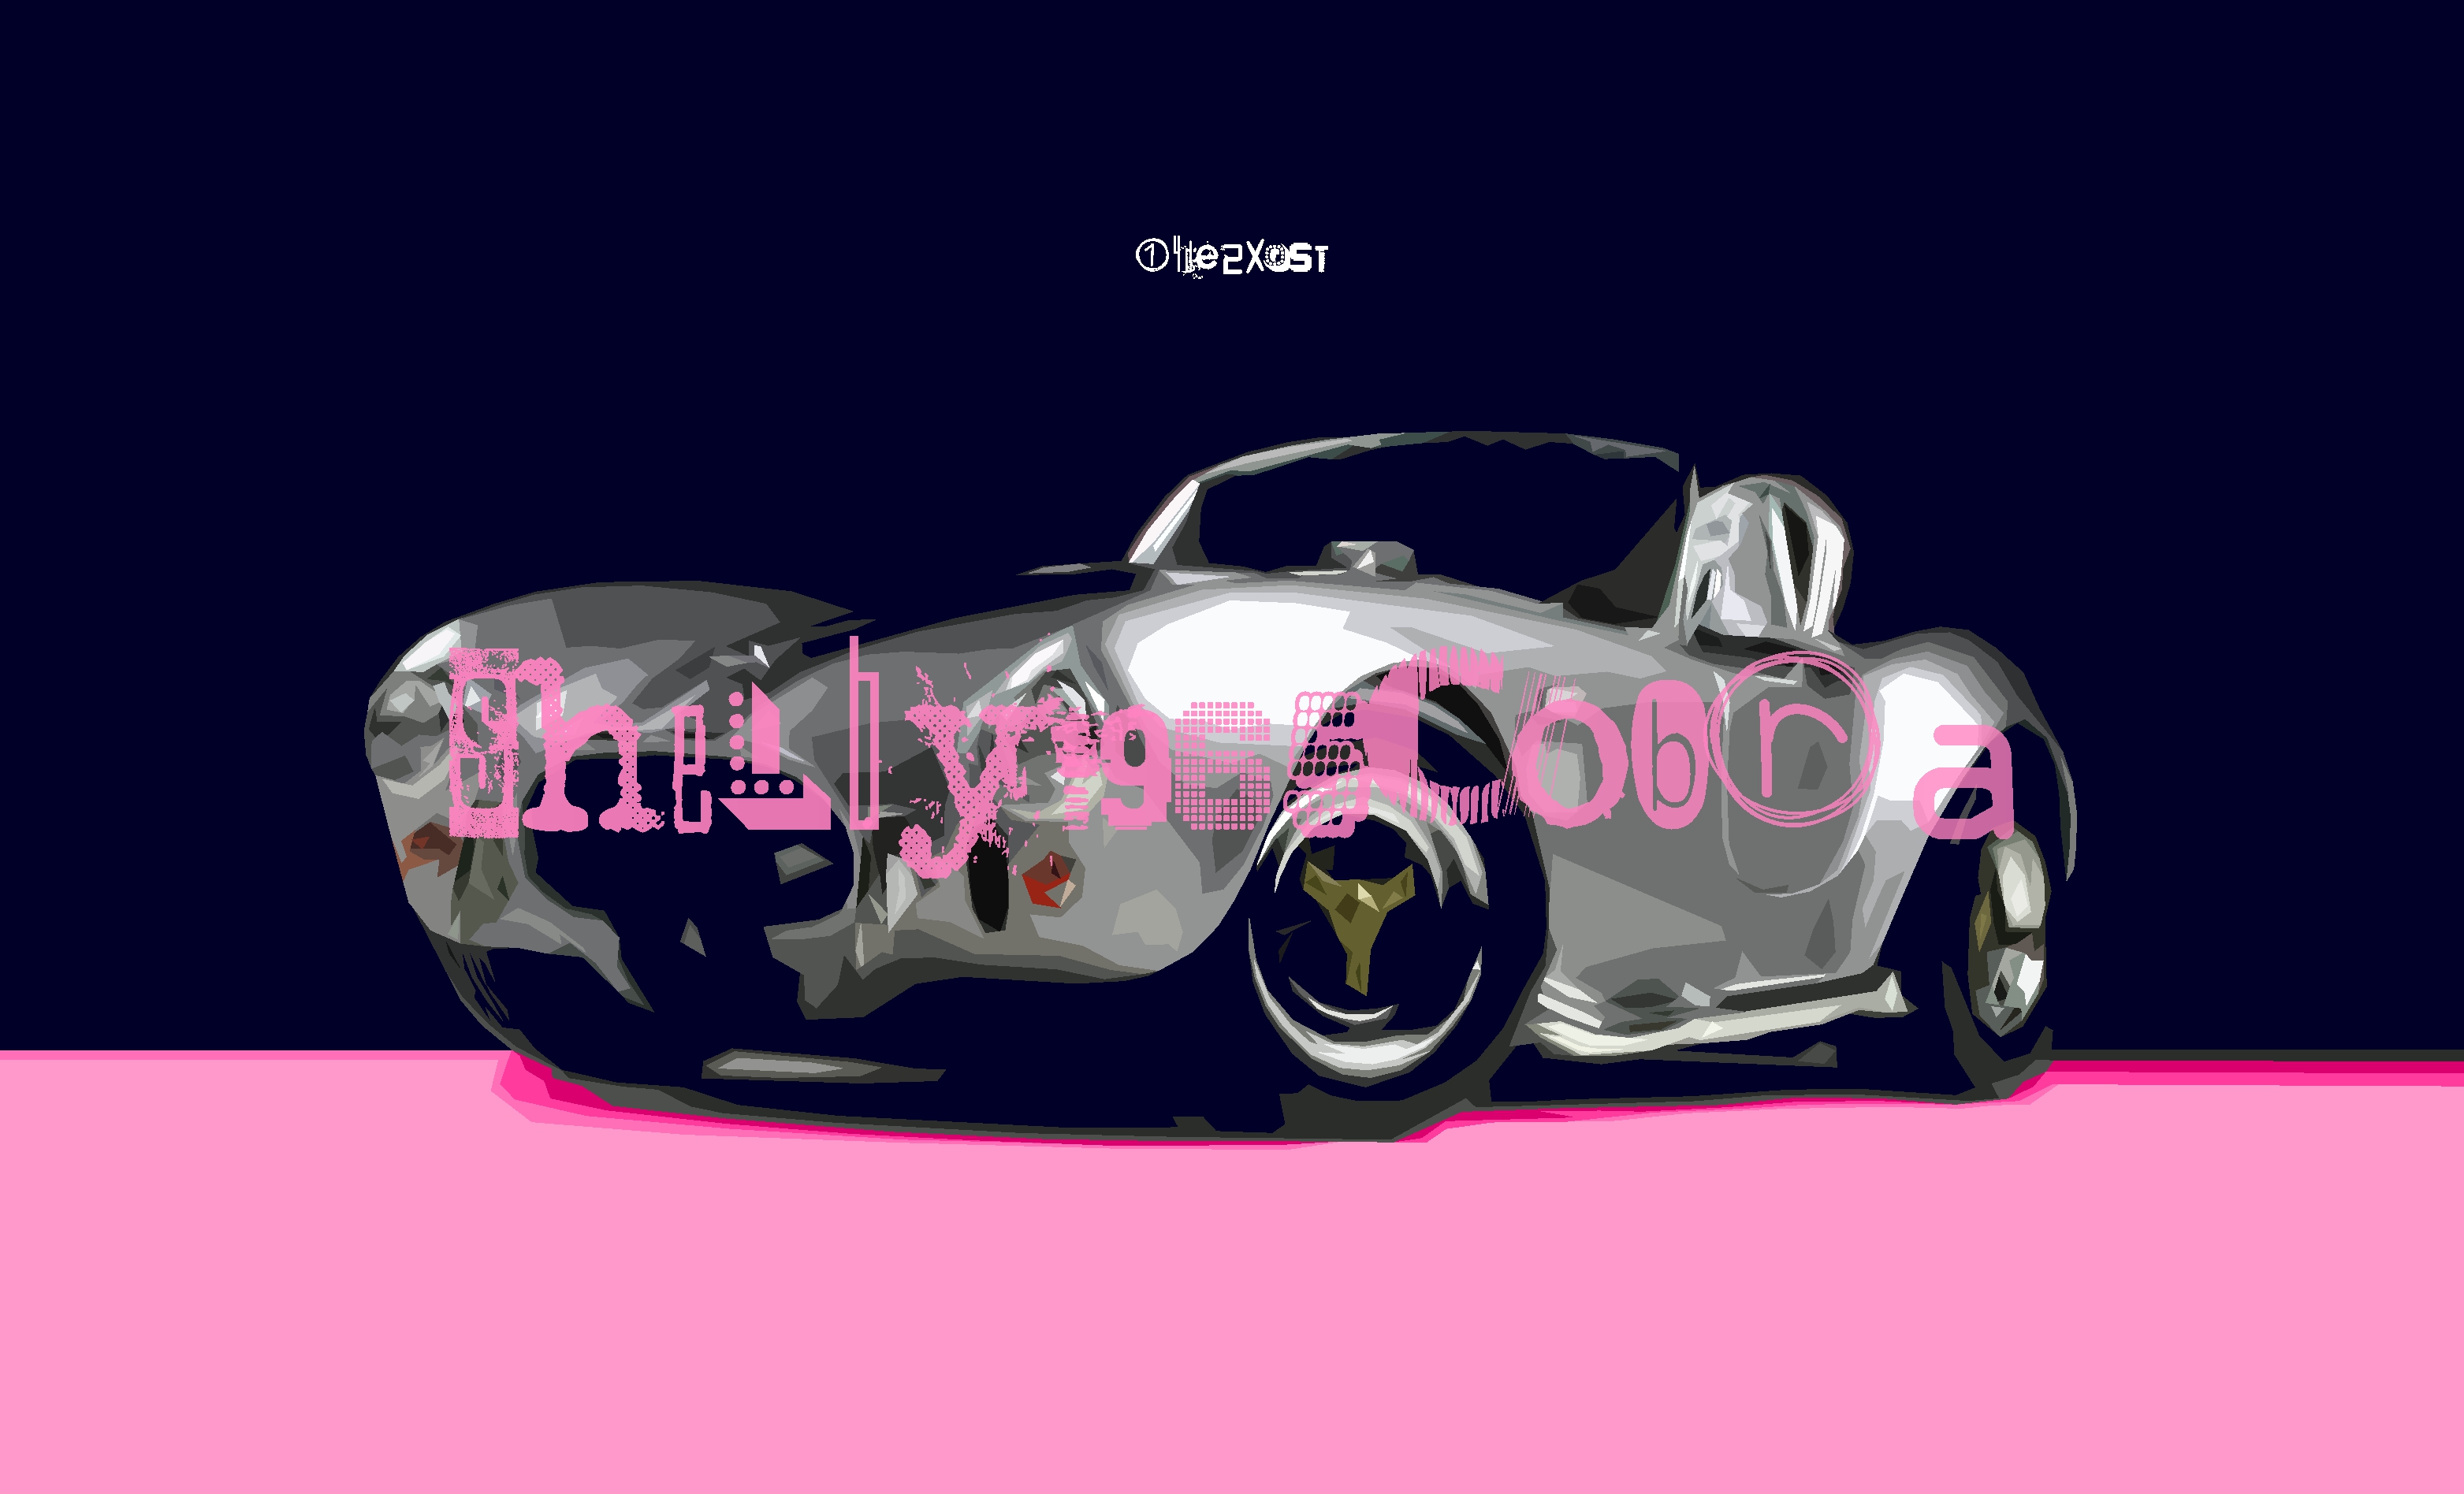 vehicles, shelby, car, pink, silver car